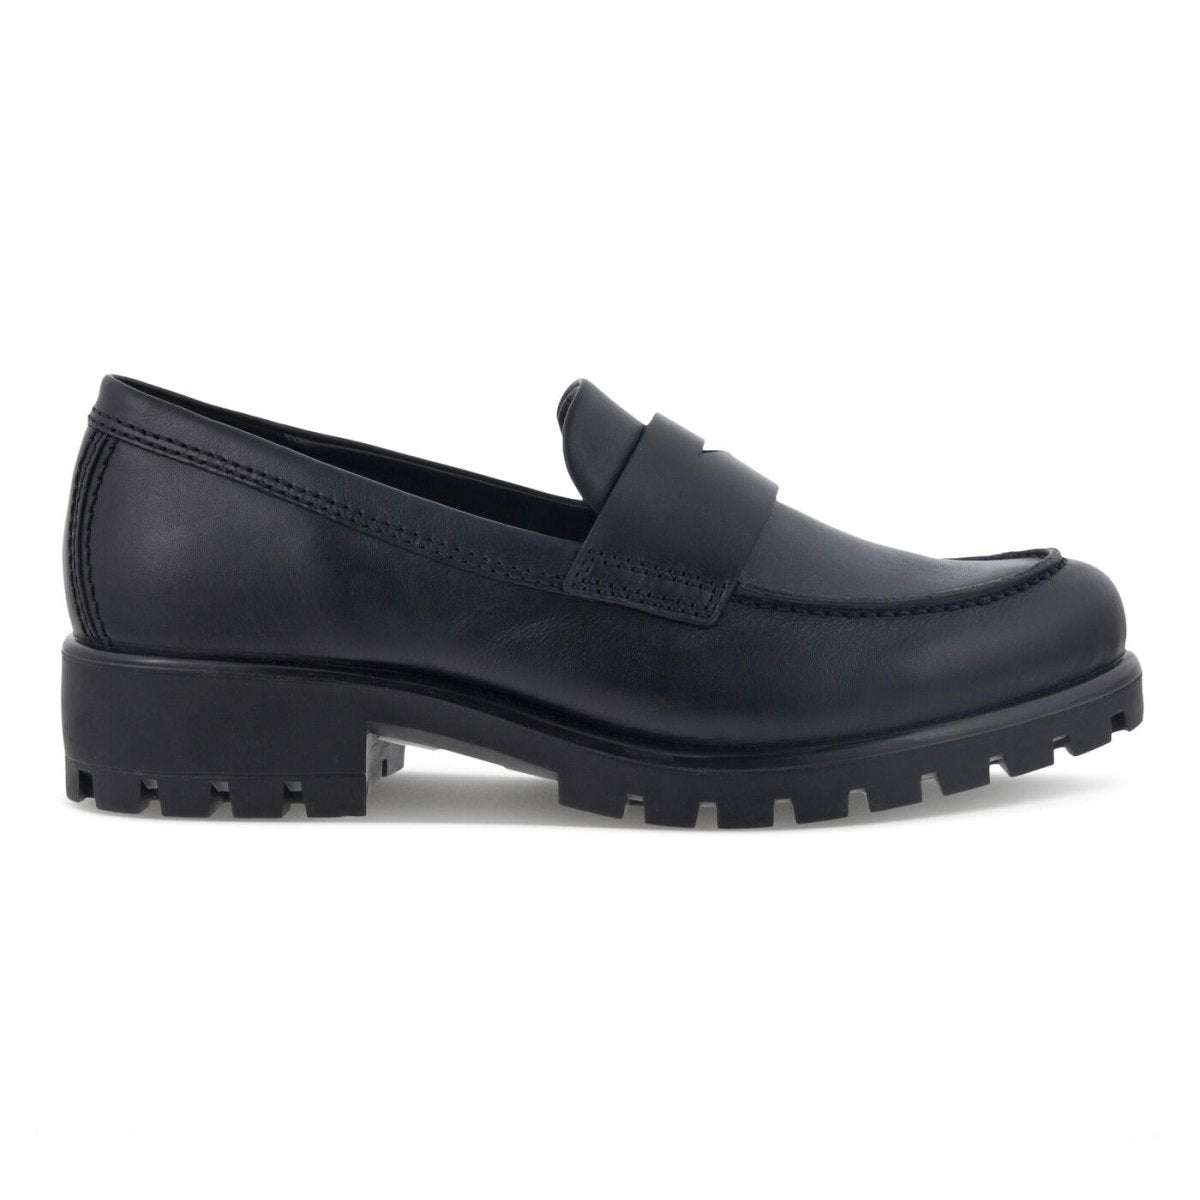 ECCO Women's Modtray Black Penny Loafer — Tip Top Shoes of New York